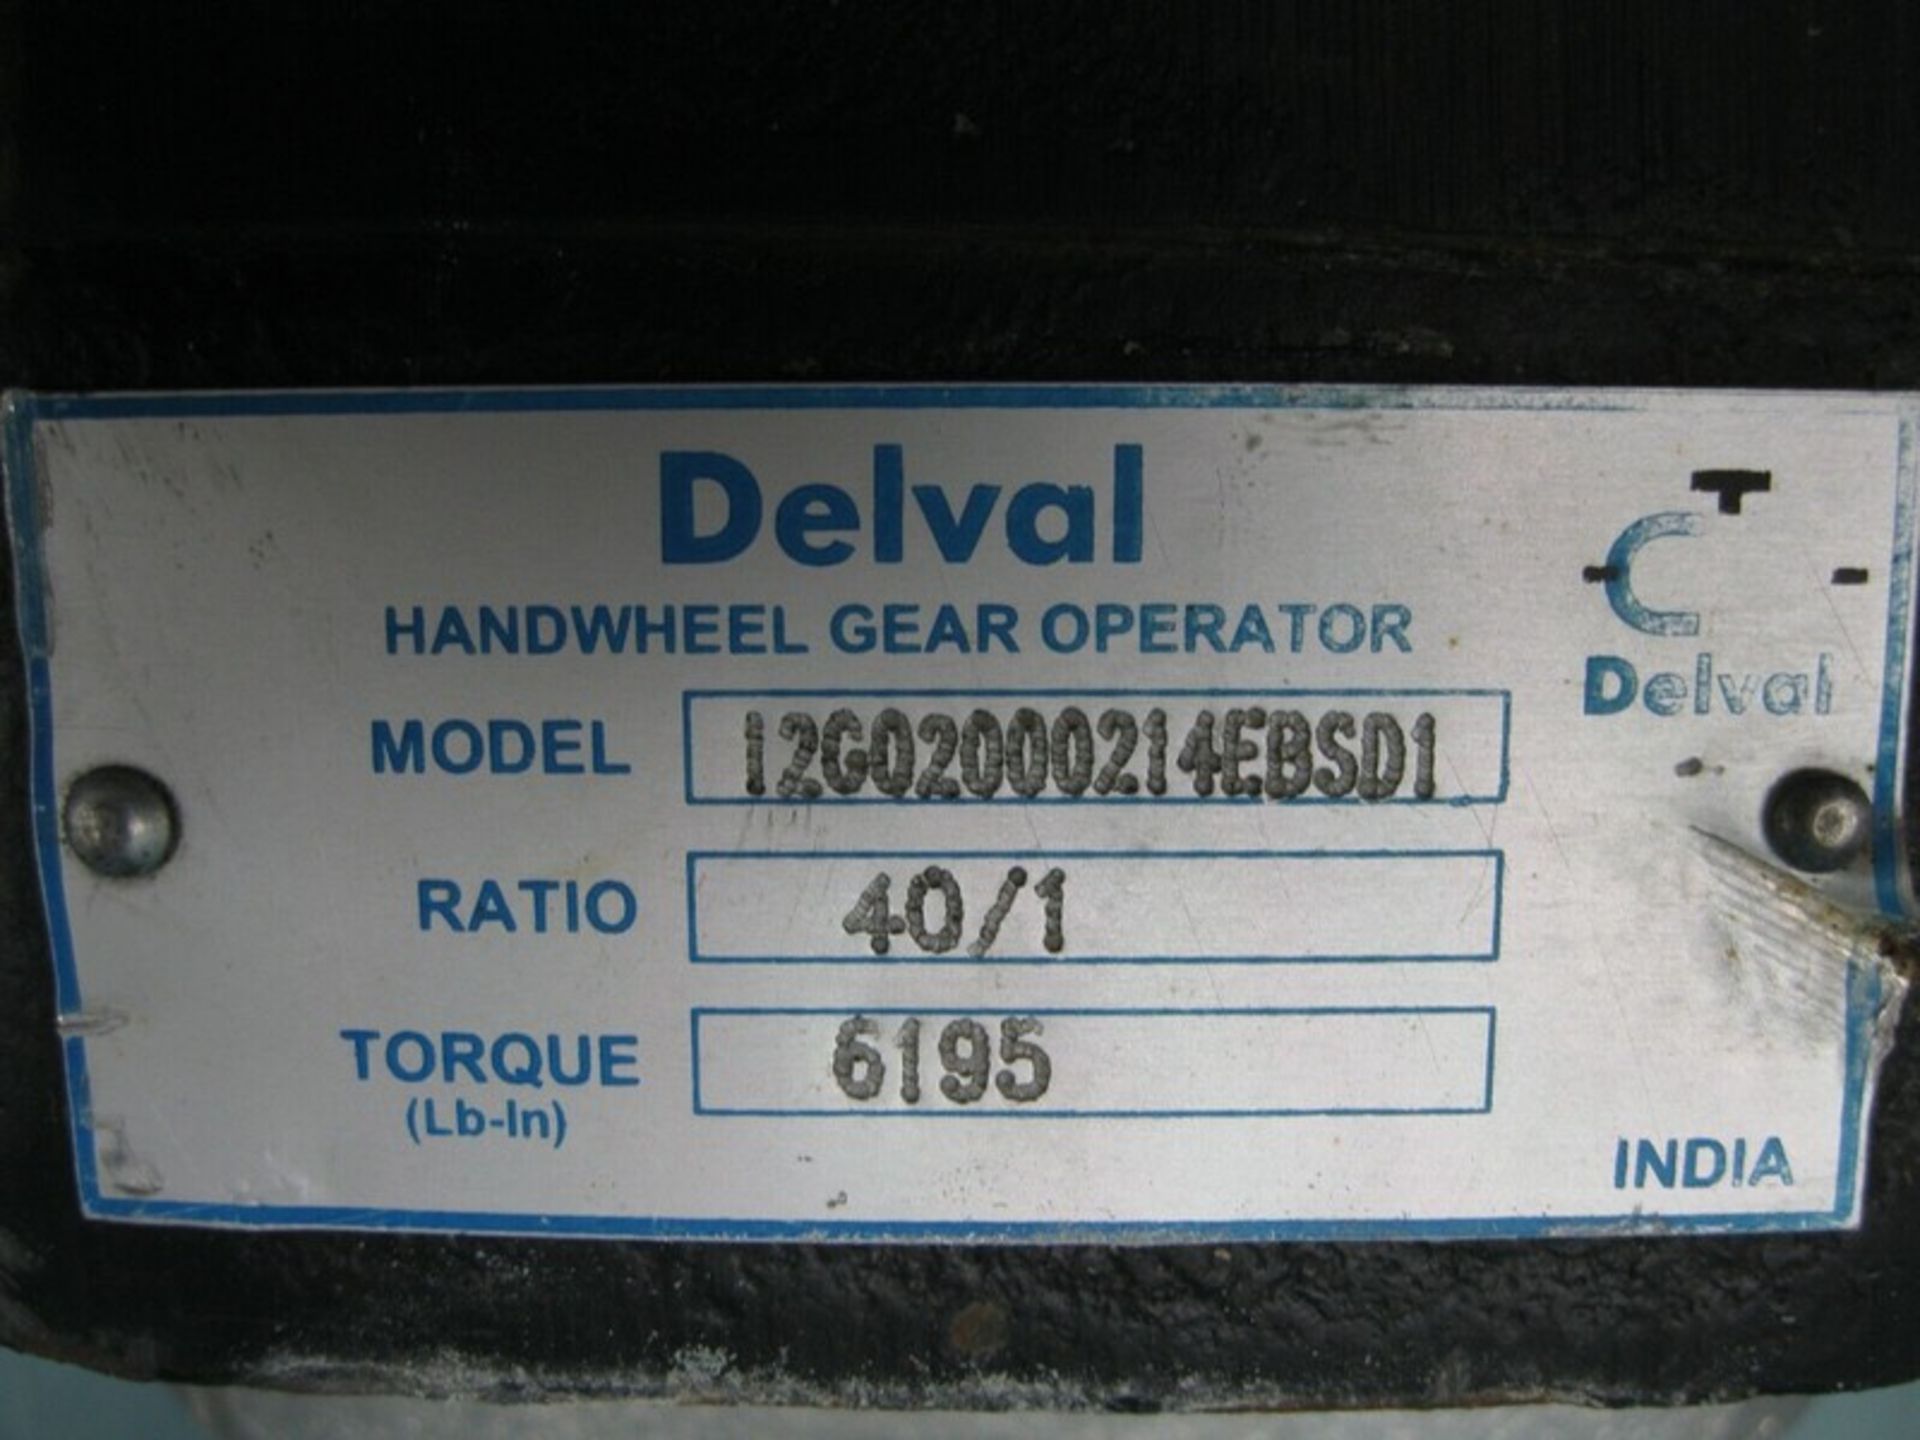 8" 150# DelVal 12G02000214EBSD1 Butterfly Valve SS x SS NO HANDWHEEL (NOTE: Packing and Palletizing - Image 3 of 3